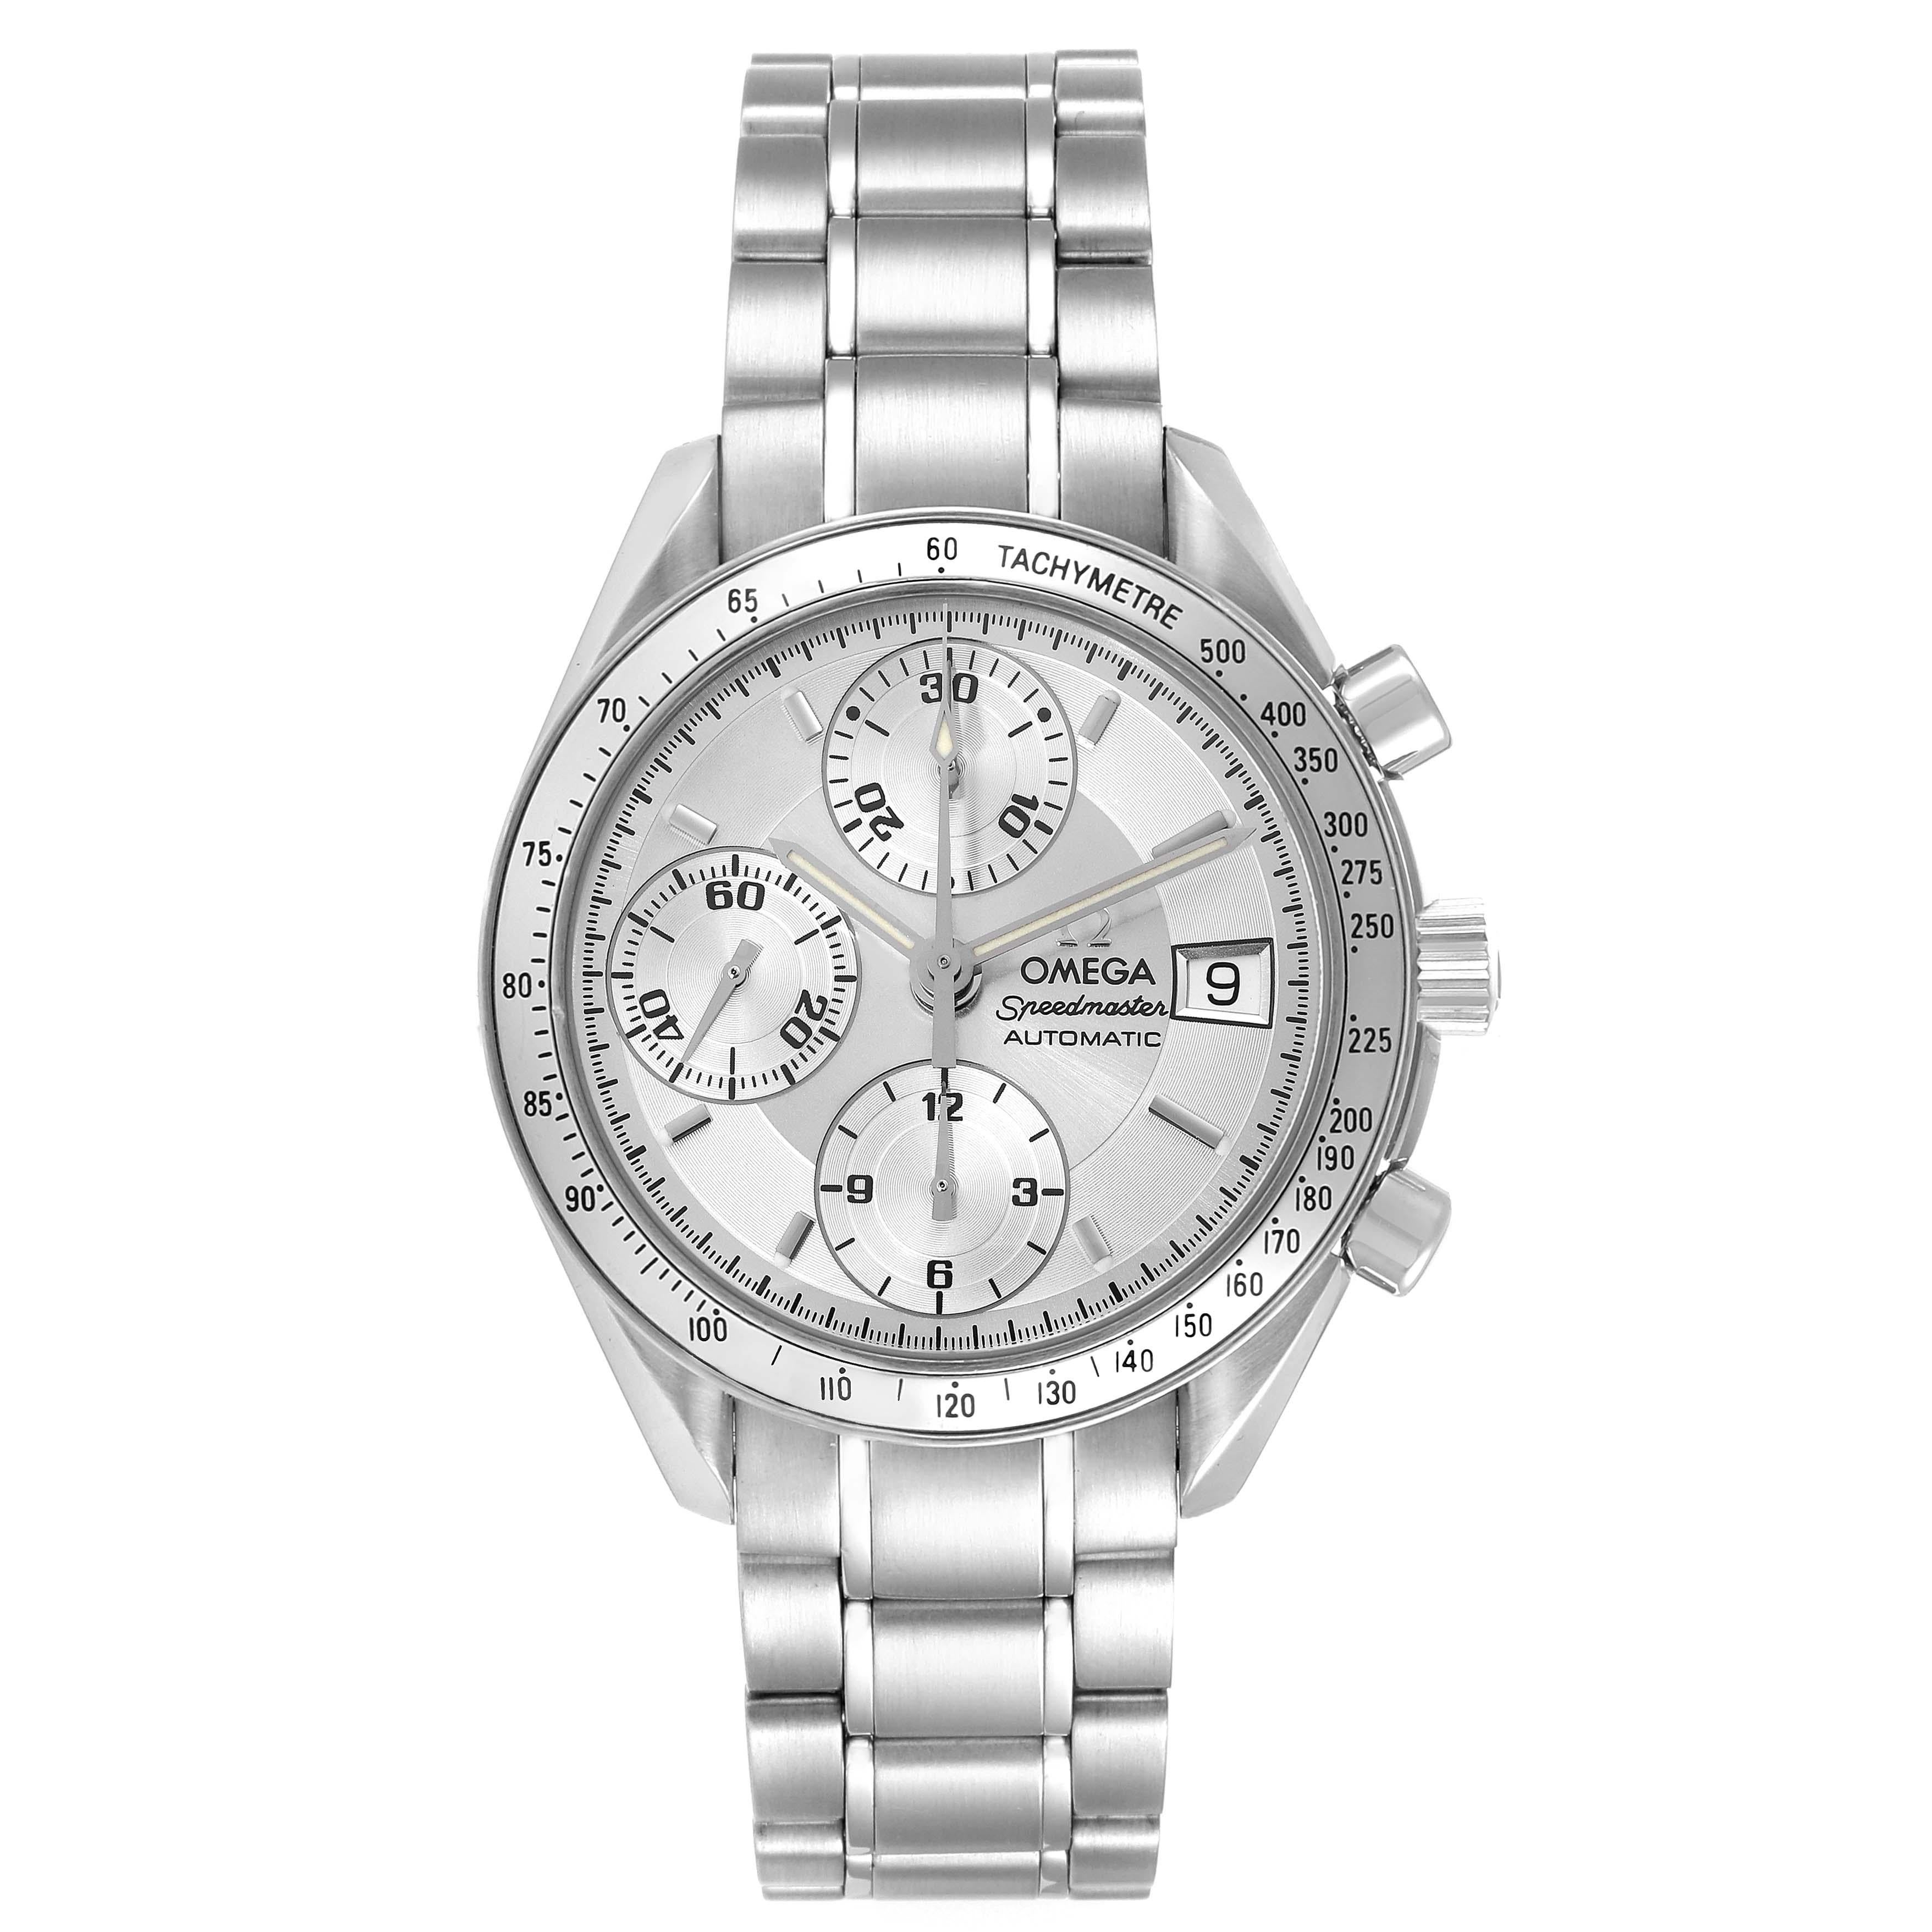 Omega Speedmaster Date Silver Dial Automatic Steel Mens Watch 3513.30.00 Card. Automatic self-winding chronograph movement. Stainless steel round case 39 mm in diameter. Polished stainless steel bezel with tachymeter function. Scratch-resistant